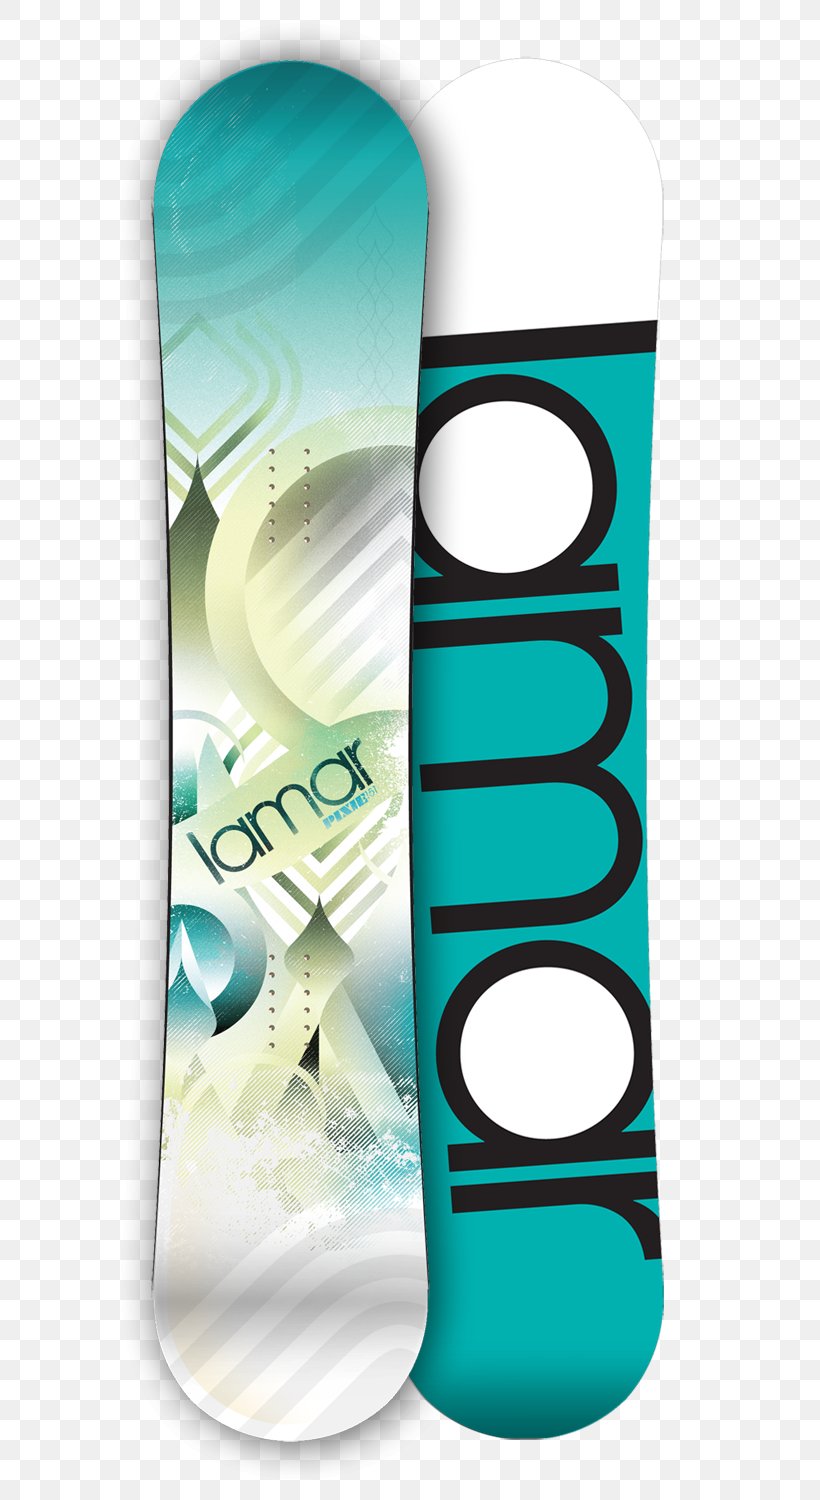 Graphic Design Snowboard, PNG, 733x1500px, Snowboard, Sports Equipment Download Free